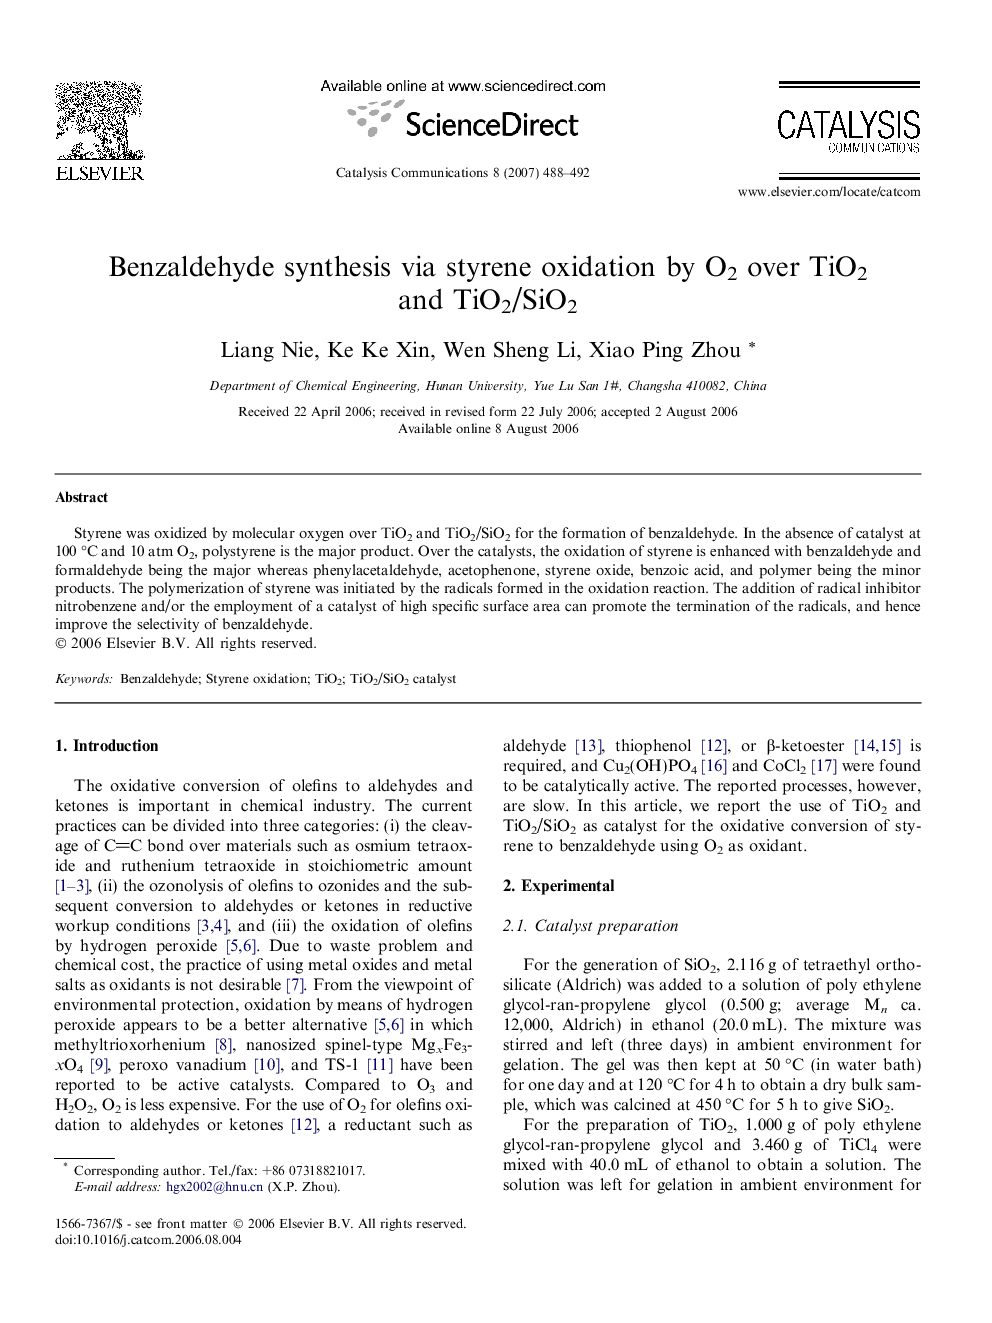 Benzaldehyde synthesis via styrene oxidation by O2 over TiO2 and TiO2/SiO2